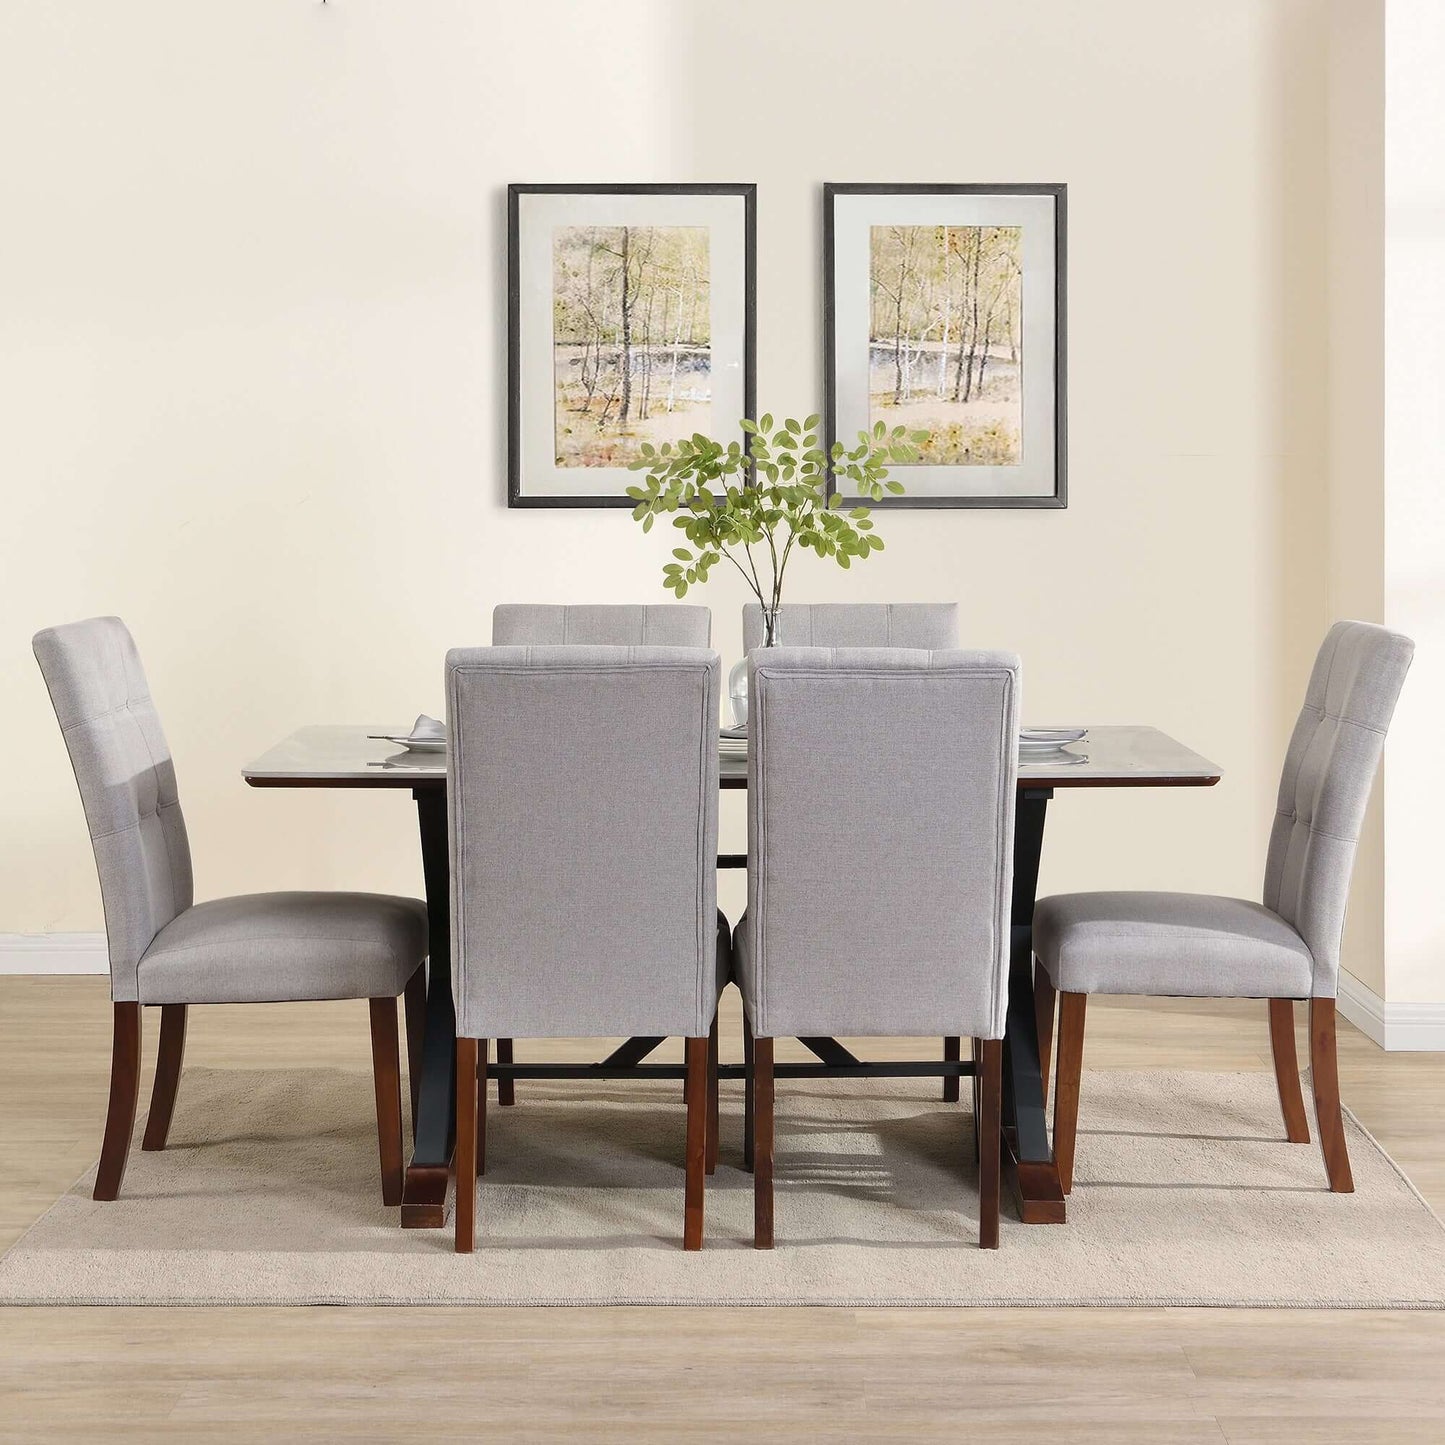 7-piece modern dining table set with gray sintered stone 63-inch rectangle table and 6 tufted upholstered chairs in a stylish dining room